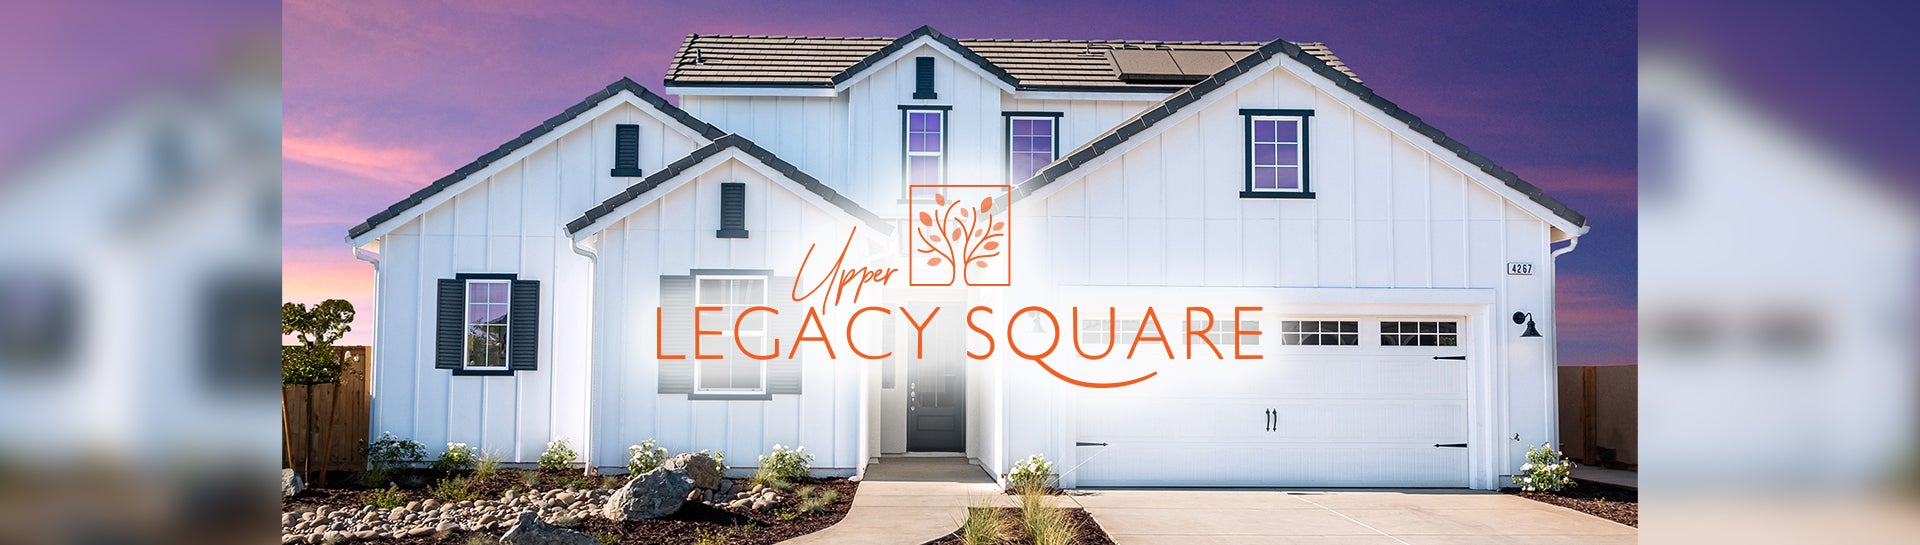 Upper Legacy Square Preview Appointment